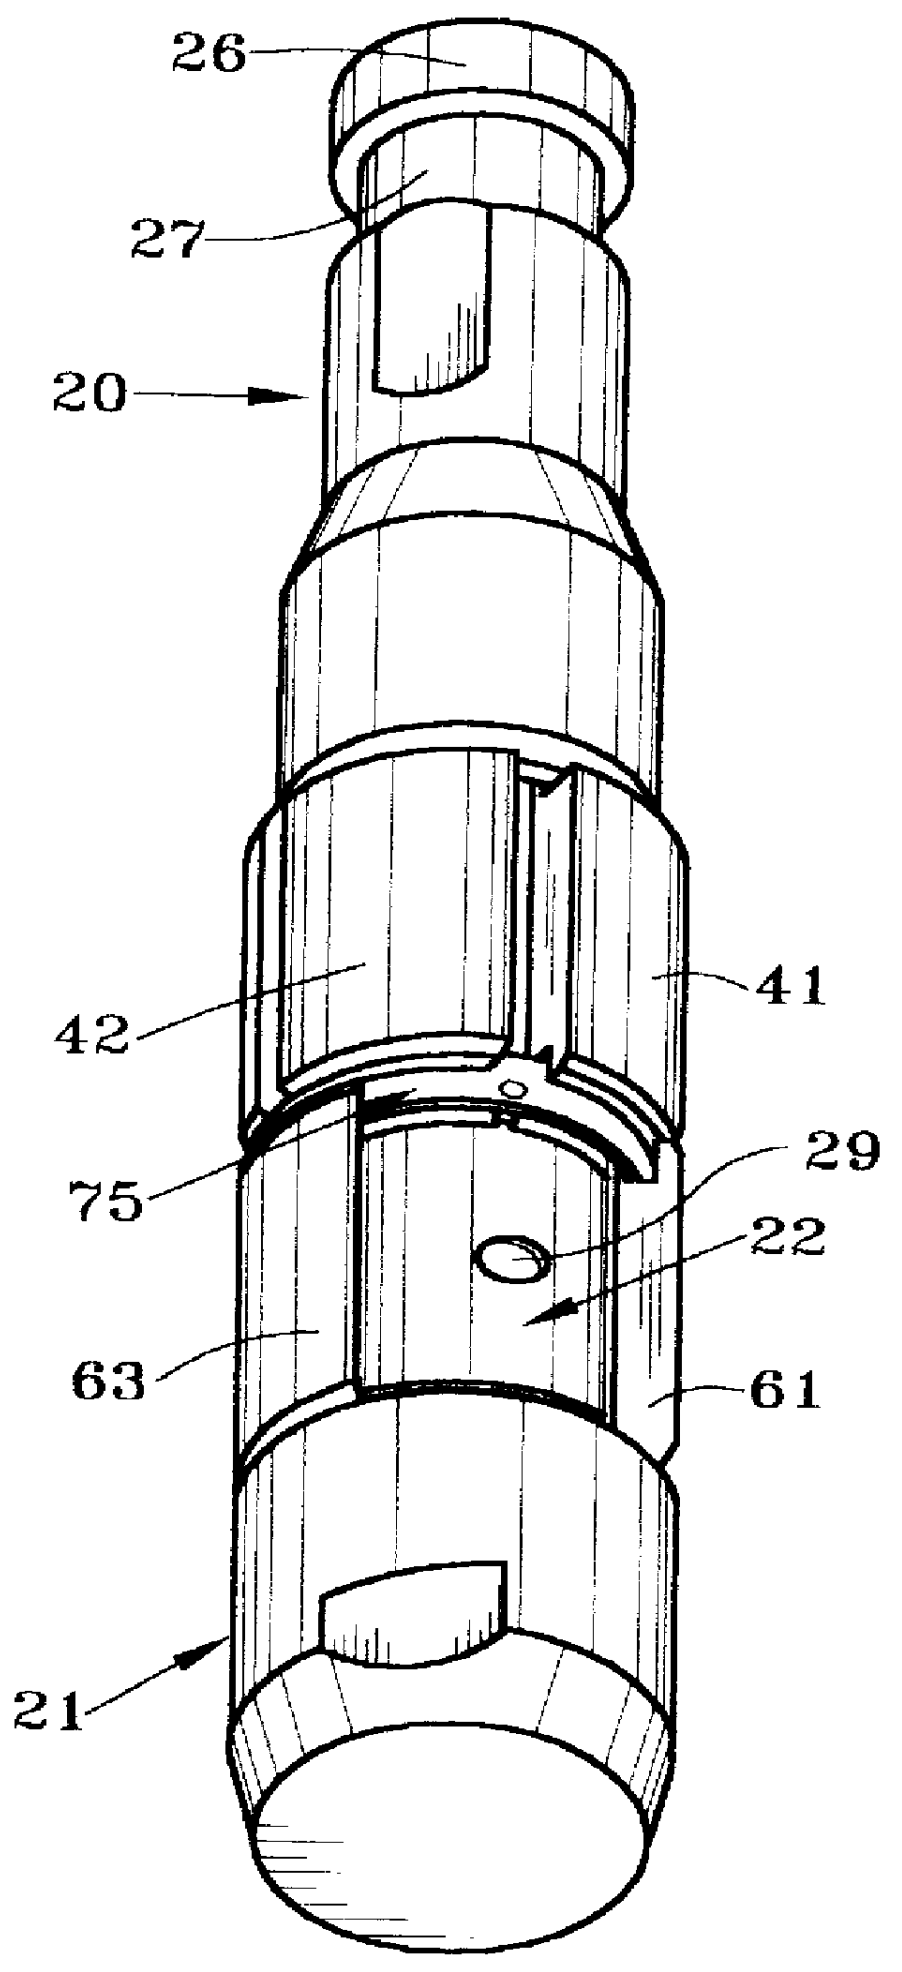 Differential pressure operated free piston for lifting well fluids